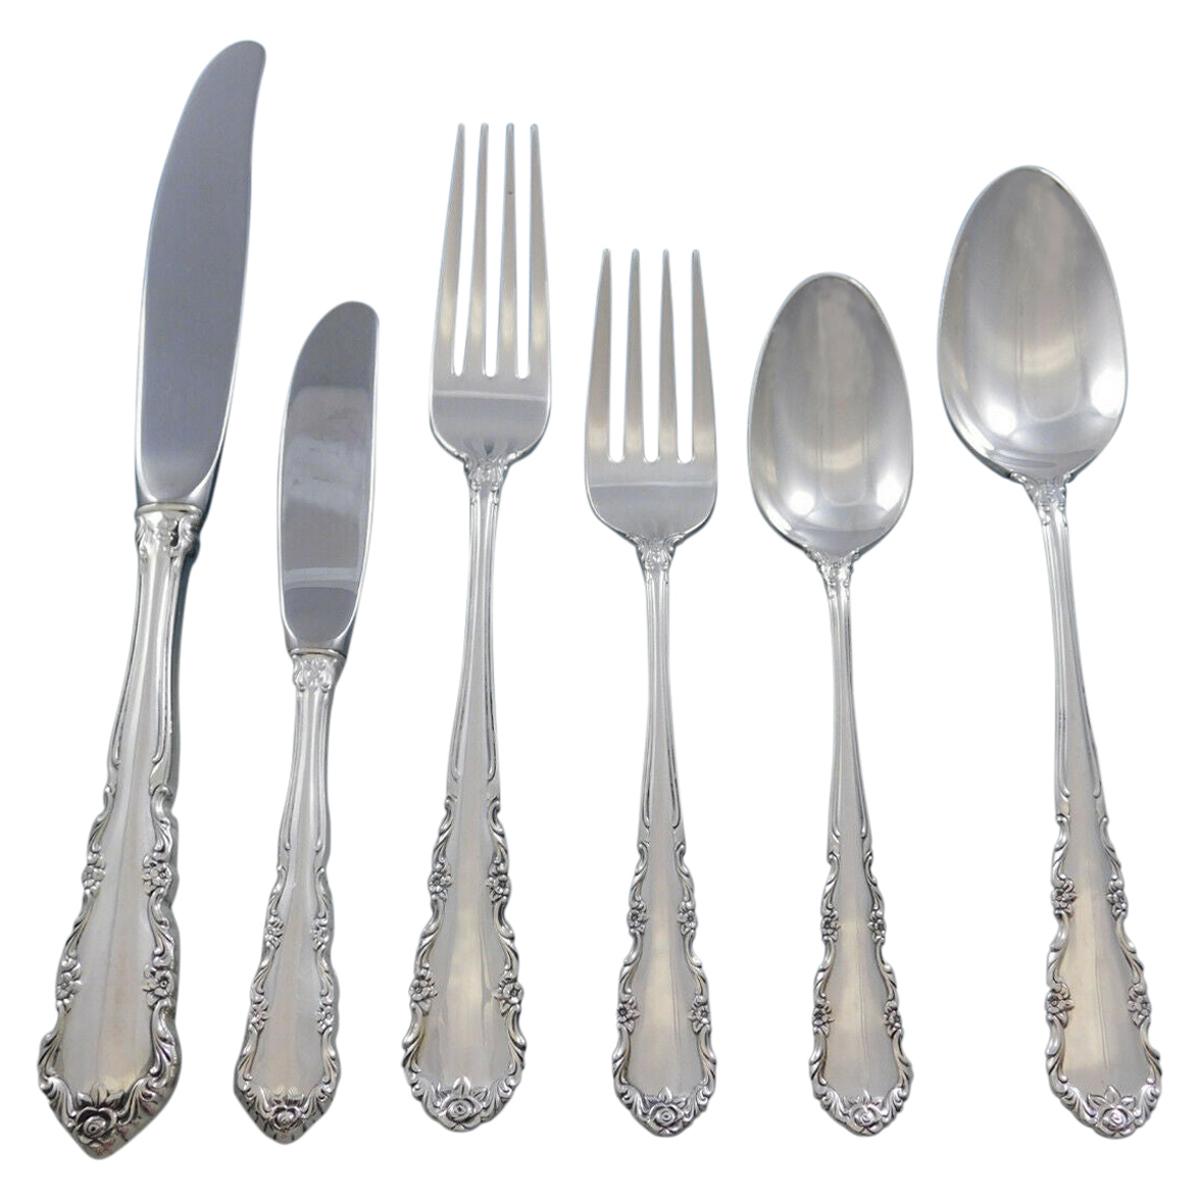 Shenandoah by Wallace Sterling Silver Flatware Set for 8 Service 51 Pieces